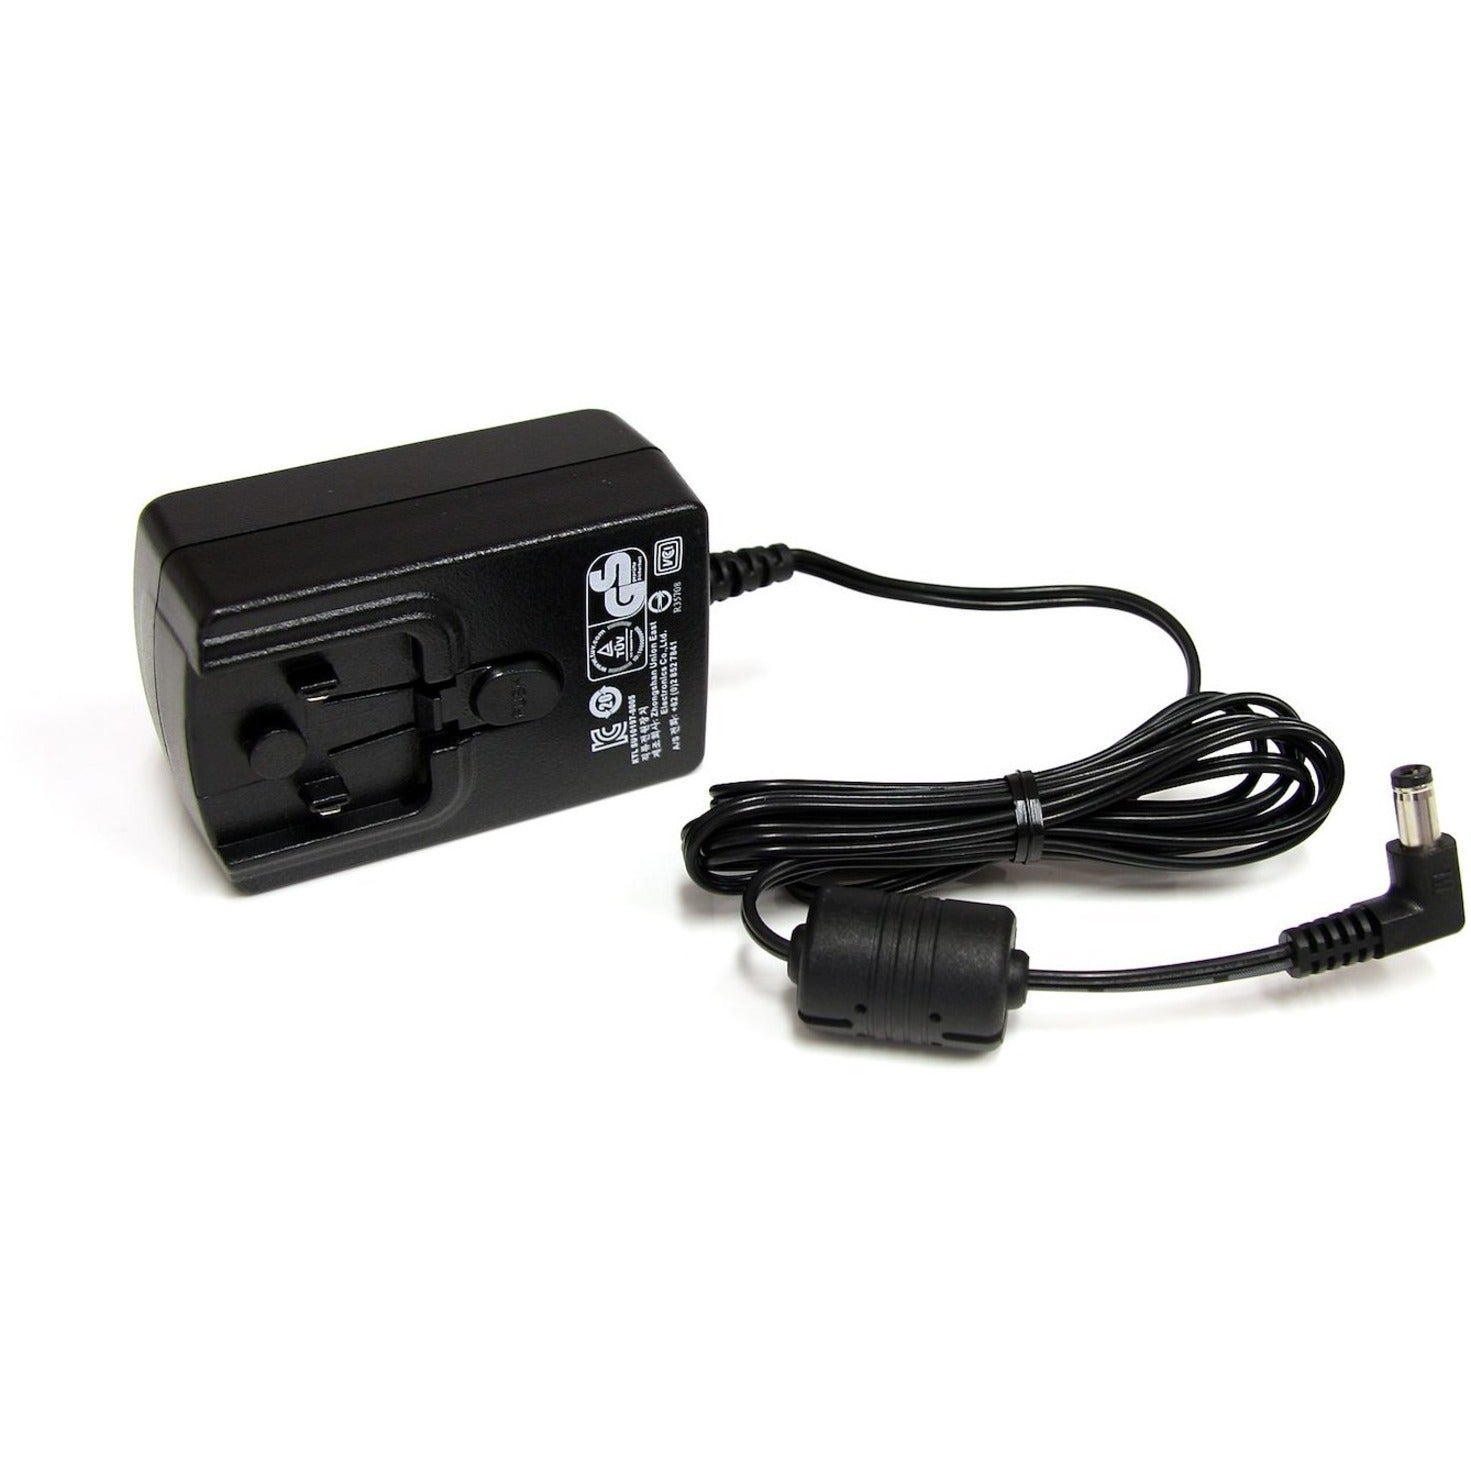 StarTech.com IM12D1500P 12V DC 1.5A Universal Power Adapter, Compact and Efficient Power Supply